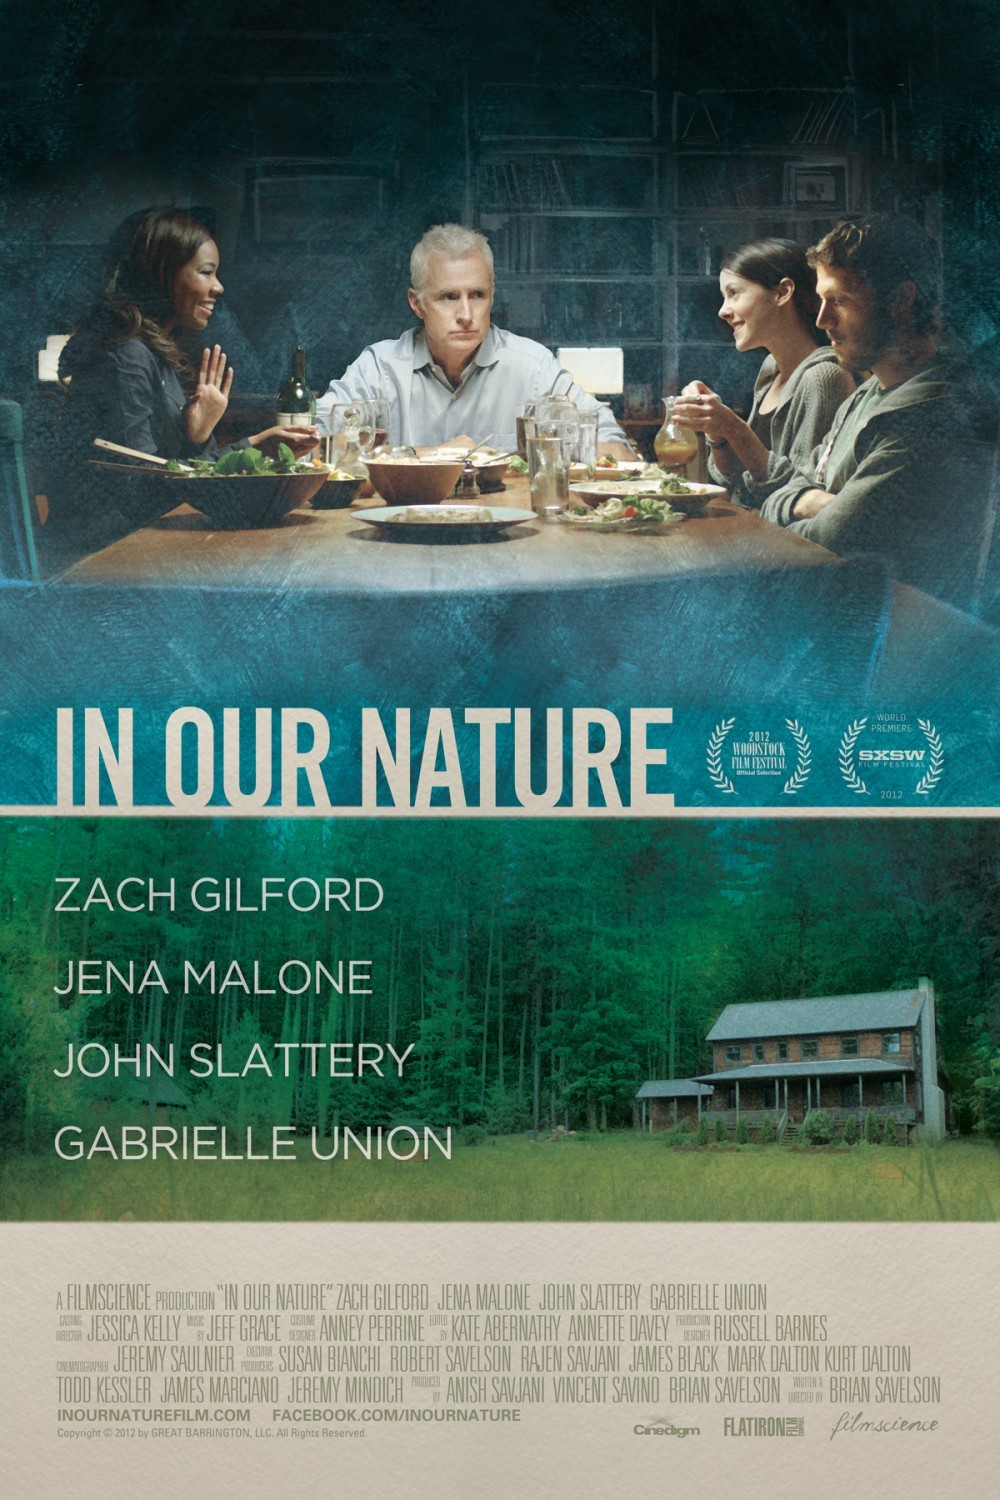 in-our-nature-poster01.jpg